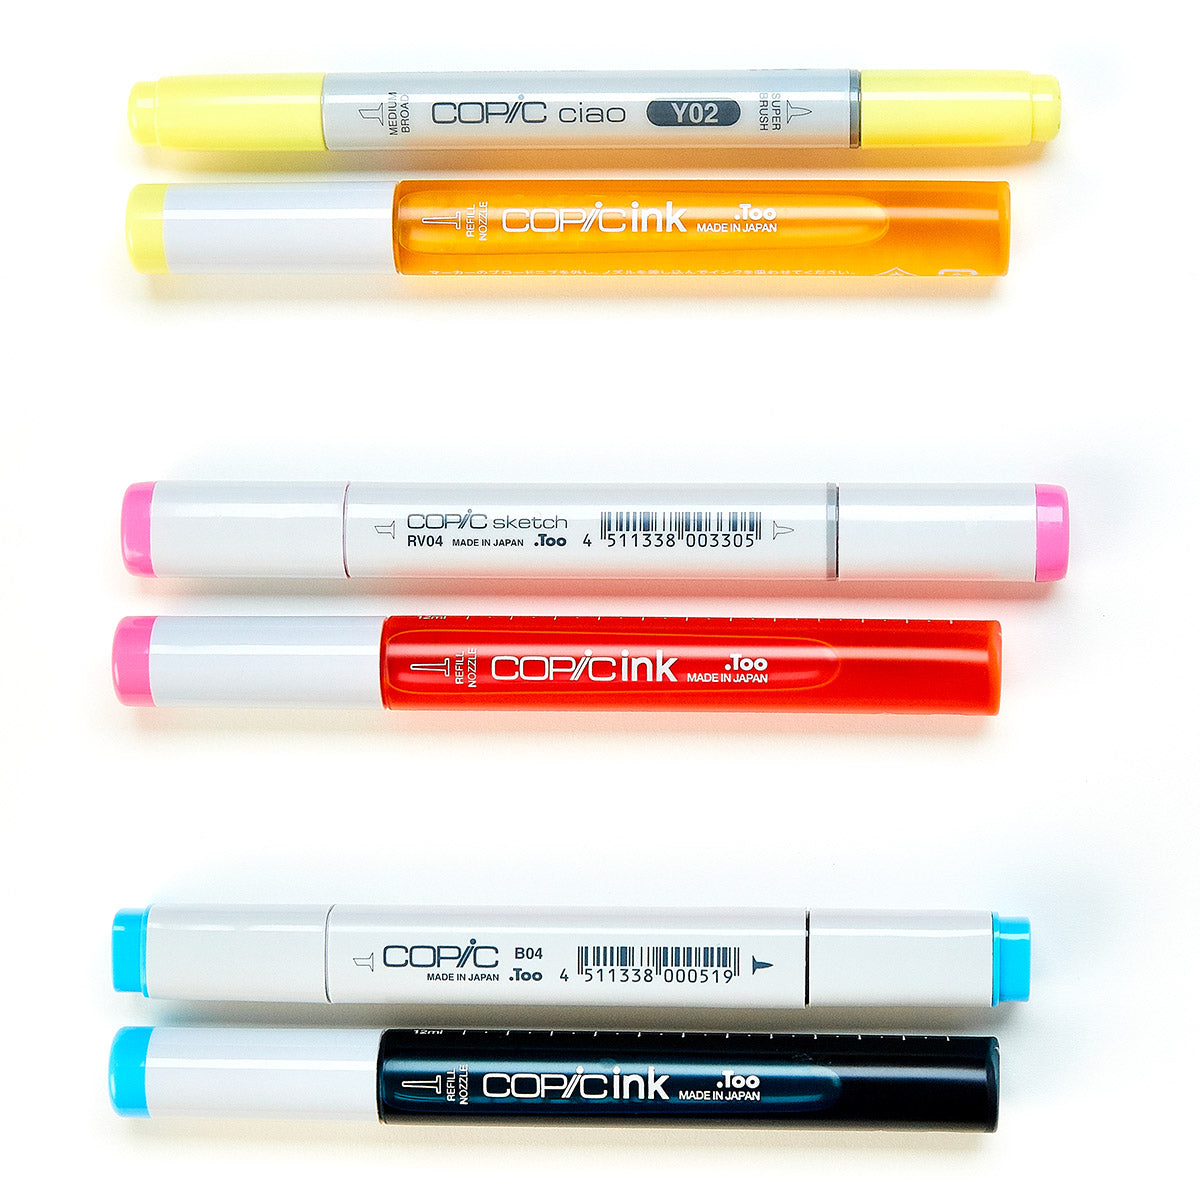 Refill your Copic Markers!